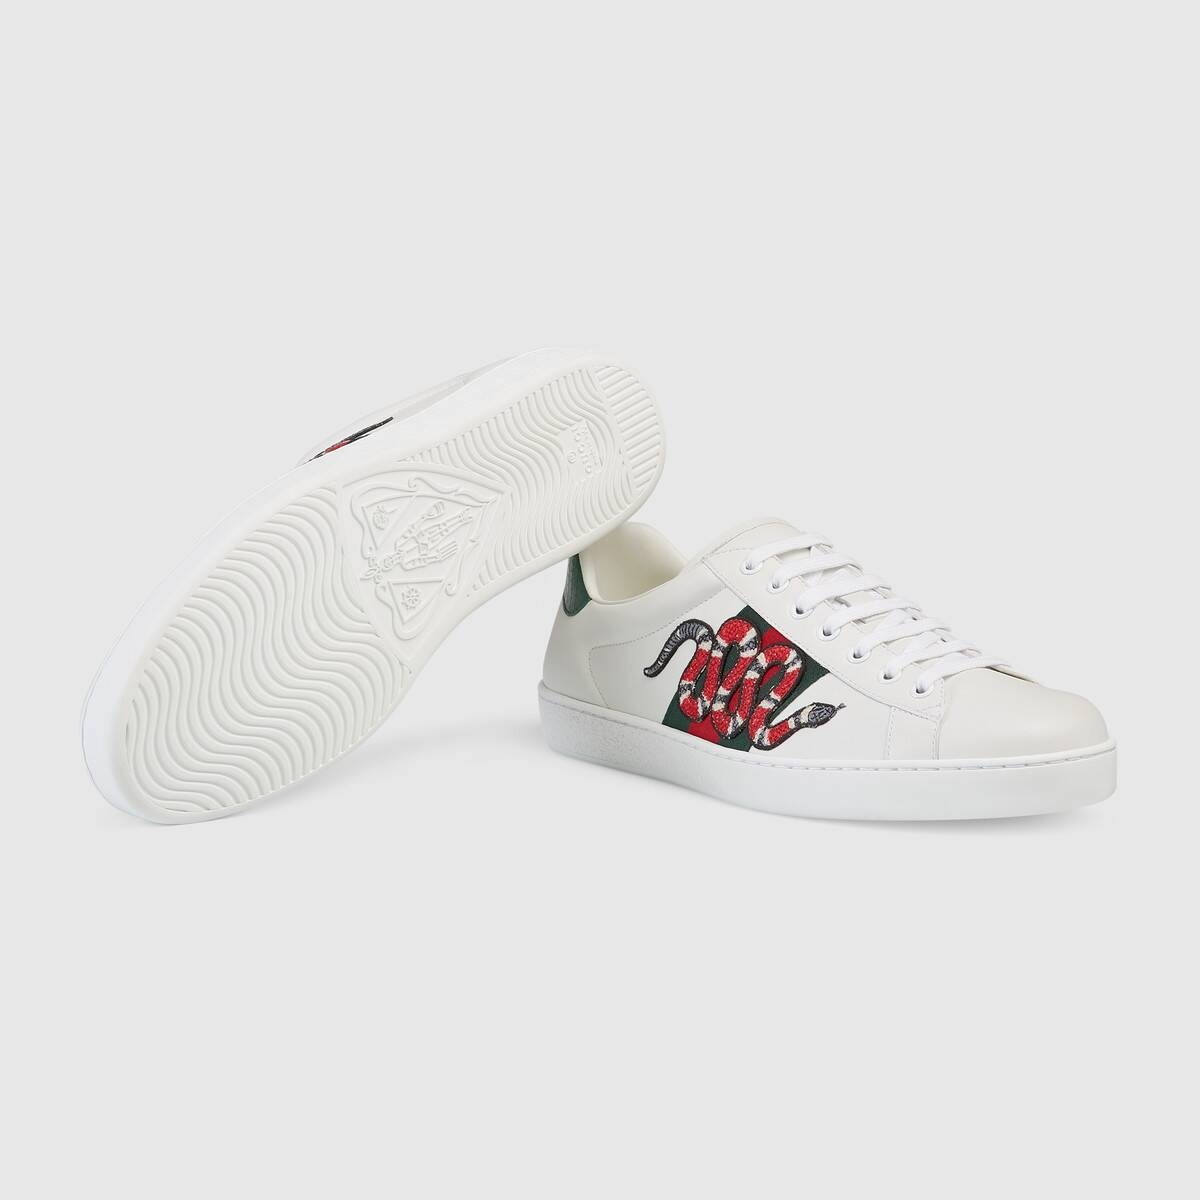 Men's Ace embroidered sneaker - 5